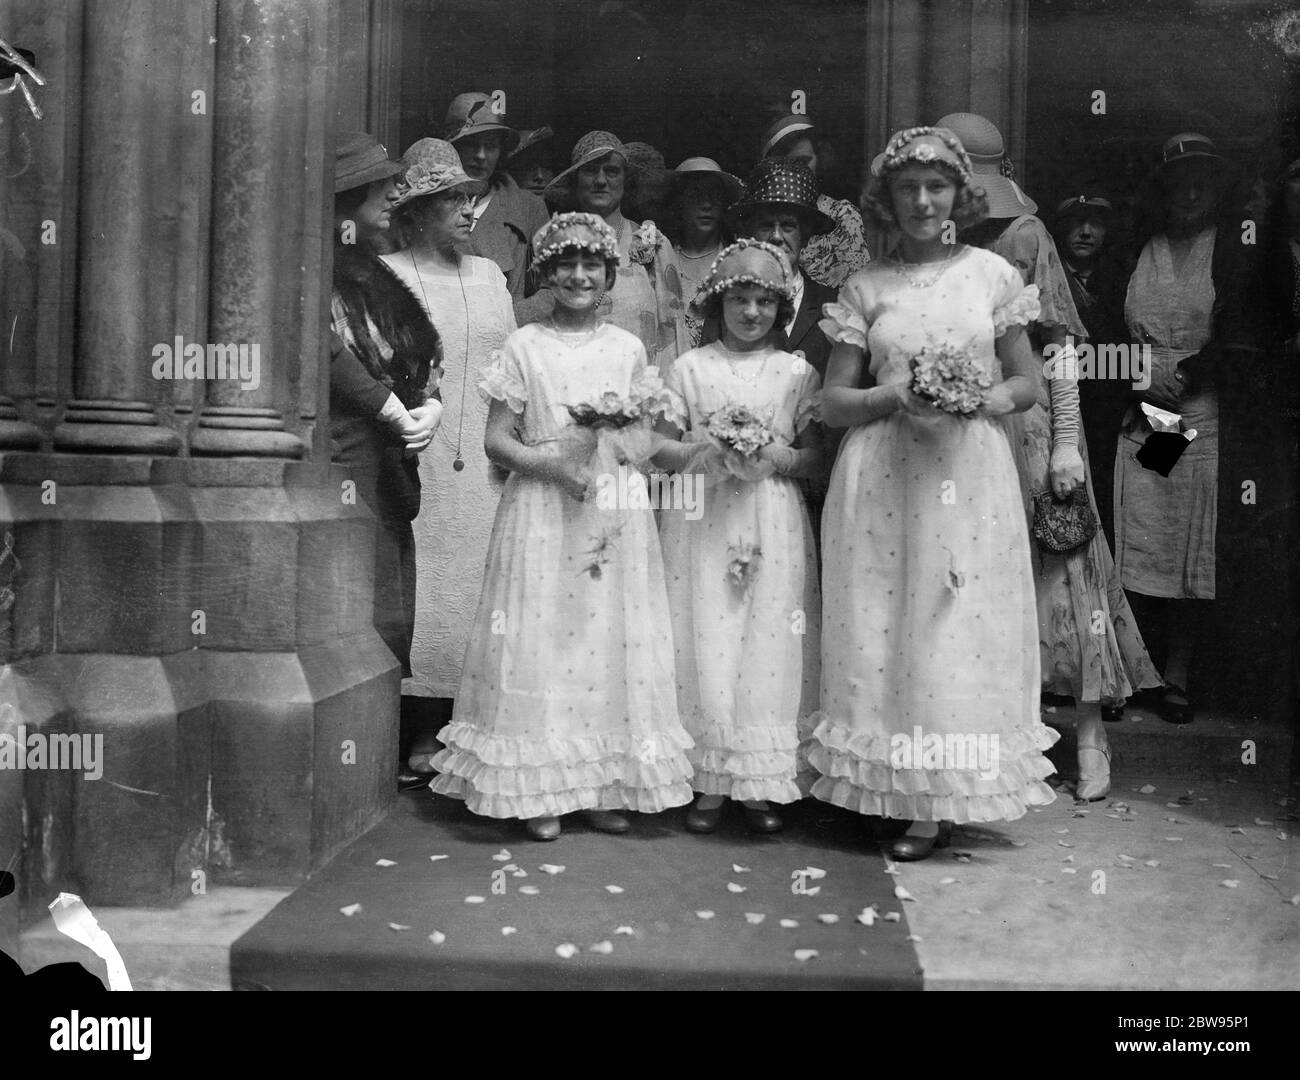 Morning wedding for Miss Craven Skyes . The wedding of Miss Ruth Patricia Craven Sykes to Mr William J P Maxwell Stuart , son of the Hon , Mrs Maxwell Stuart , of Oxford Lodge , Banbury , took place at St James church , Spanish Place , London . The bride and groom leaving the church after the ceremony . 7 July 1932 Stock Photo